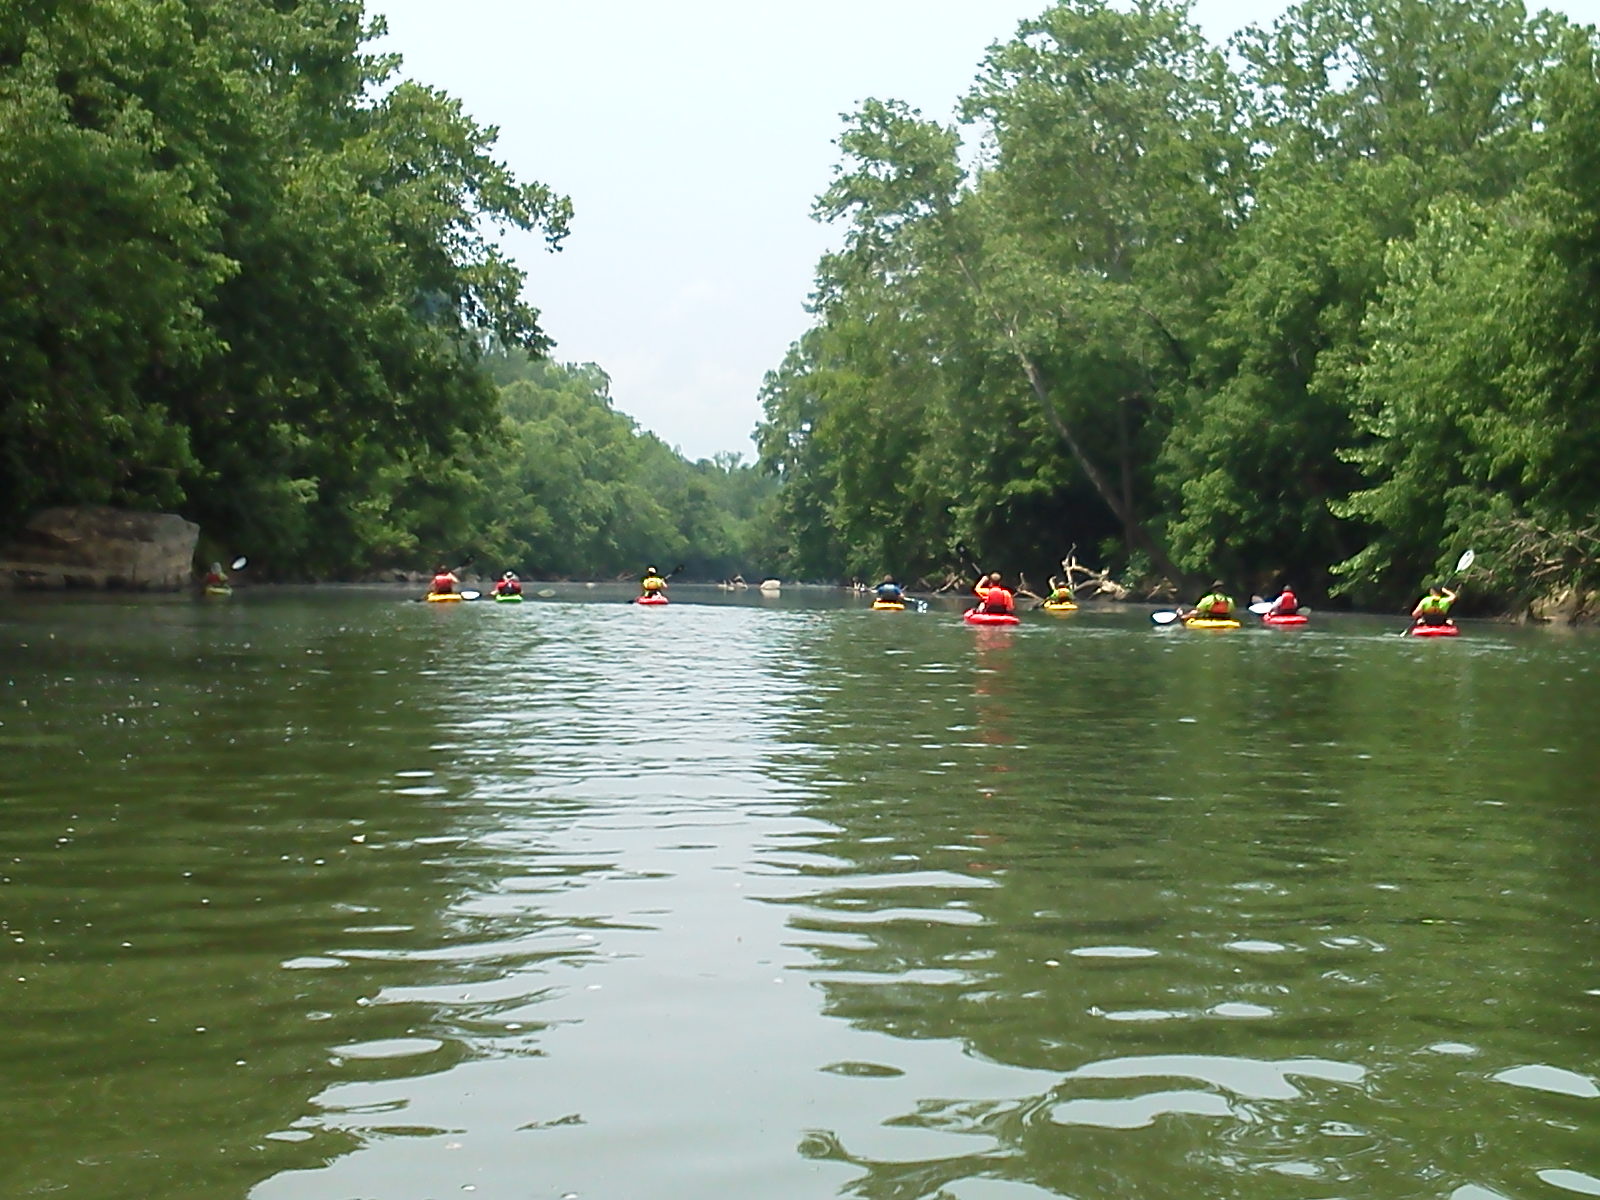 people are rafting down a narrow river in rafts